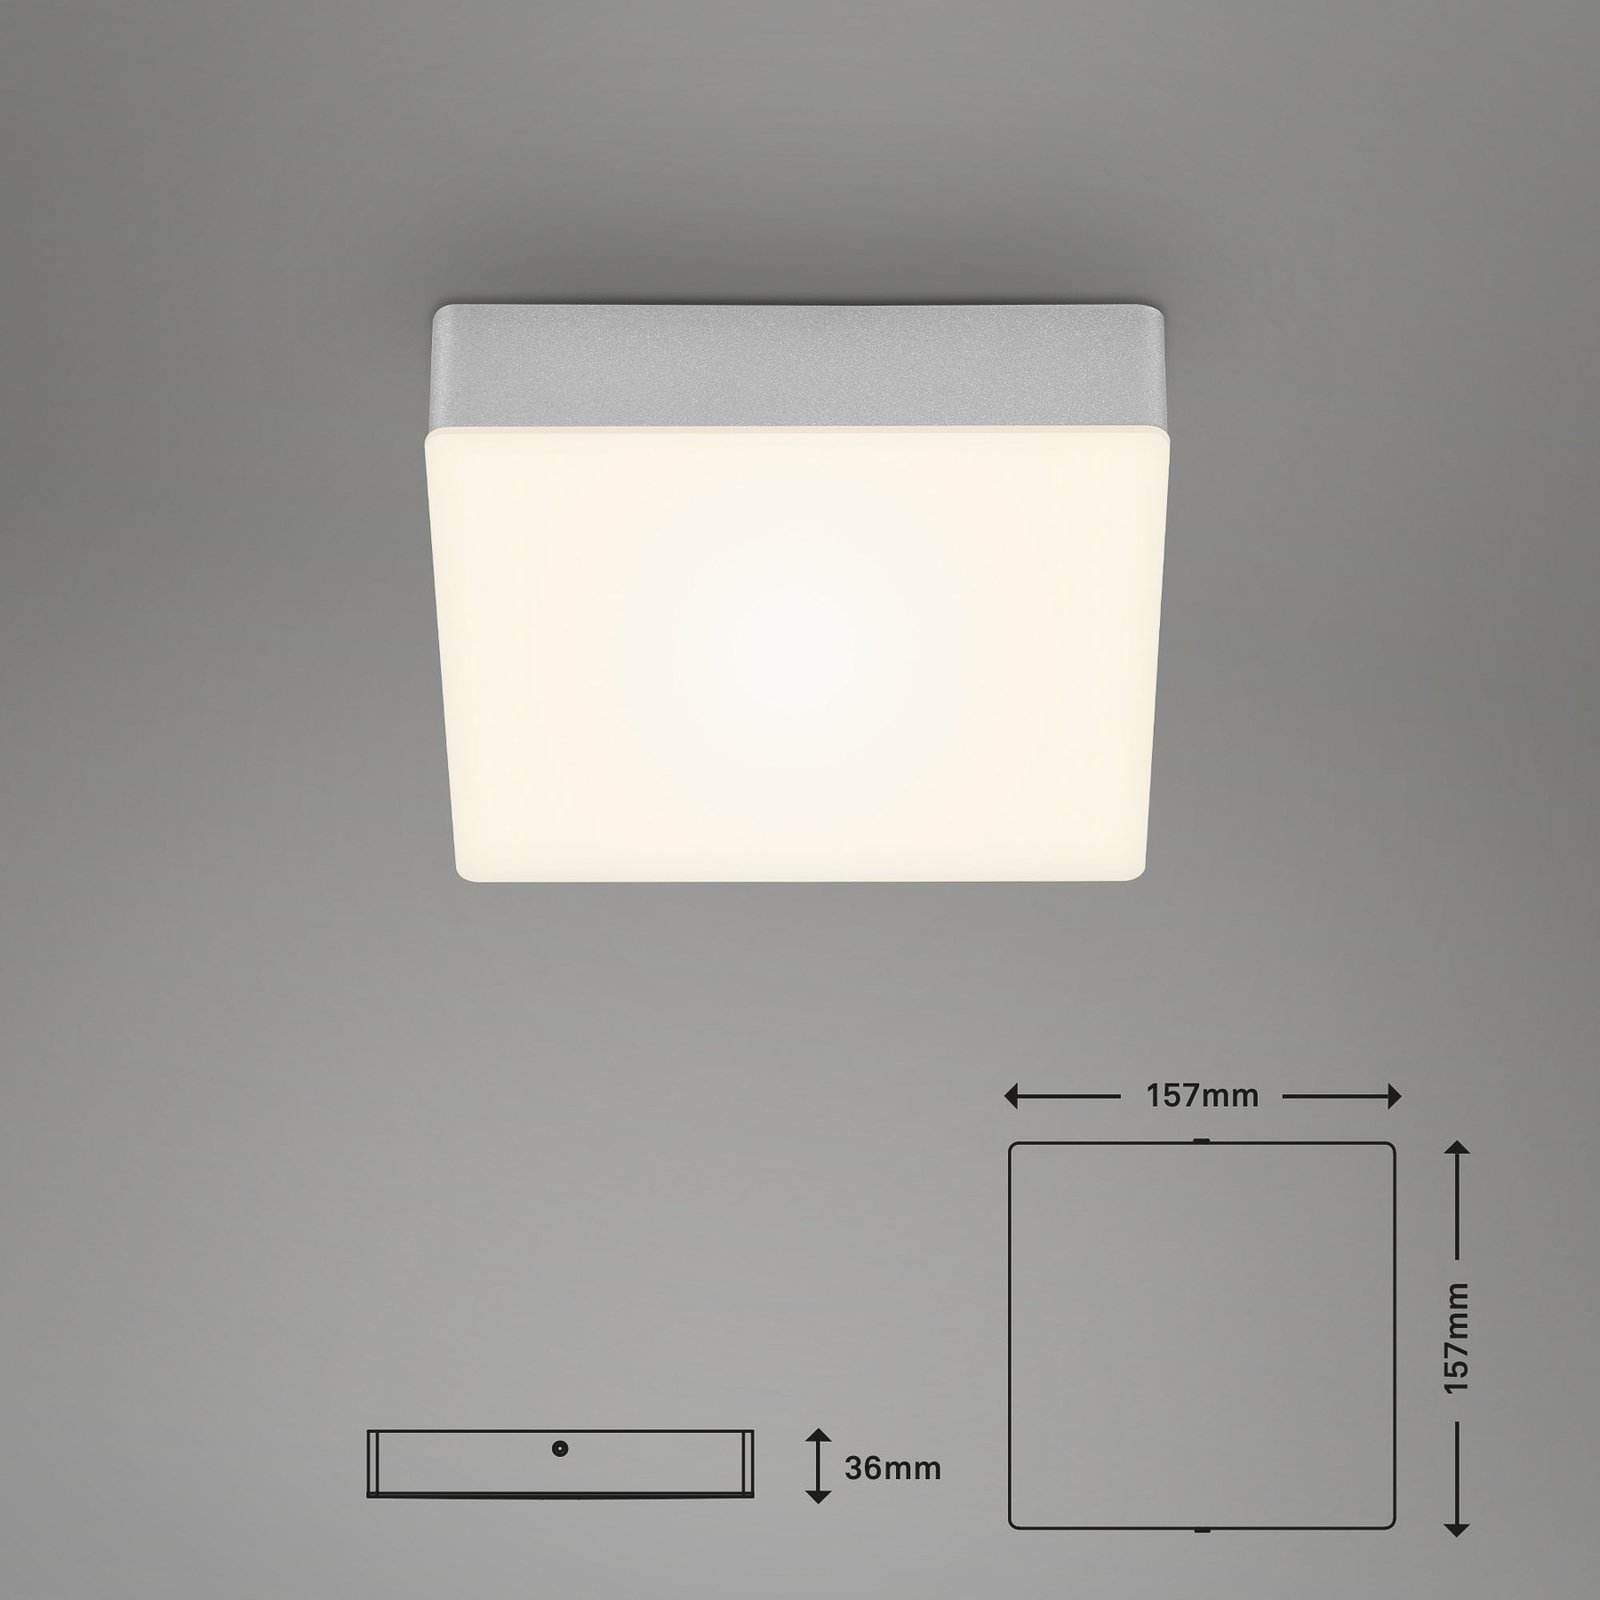 LED ceiling light Flame, 15.7 x 15.7 cm, silver